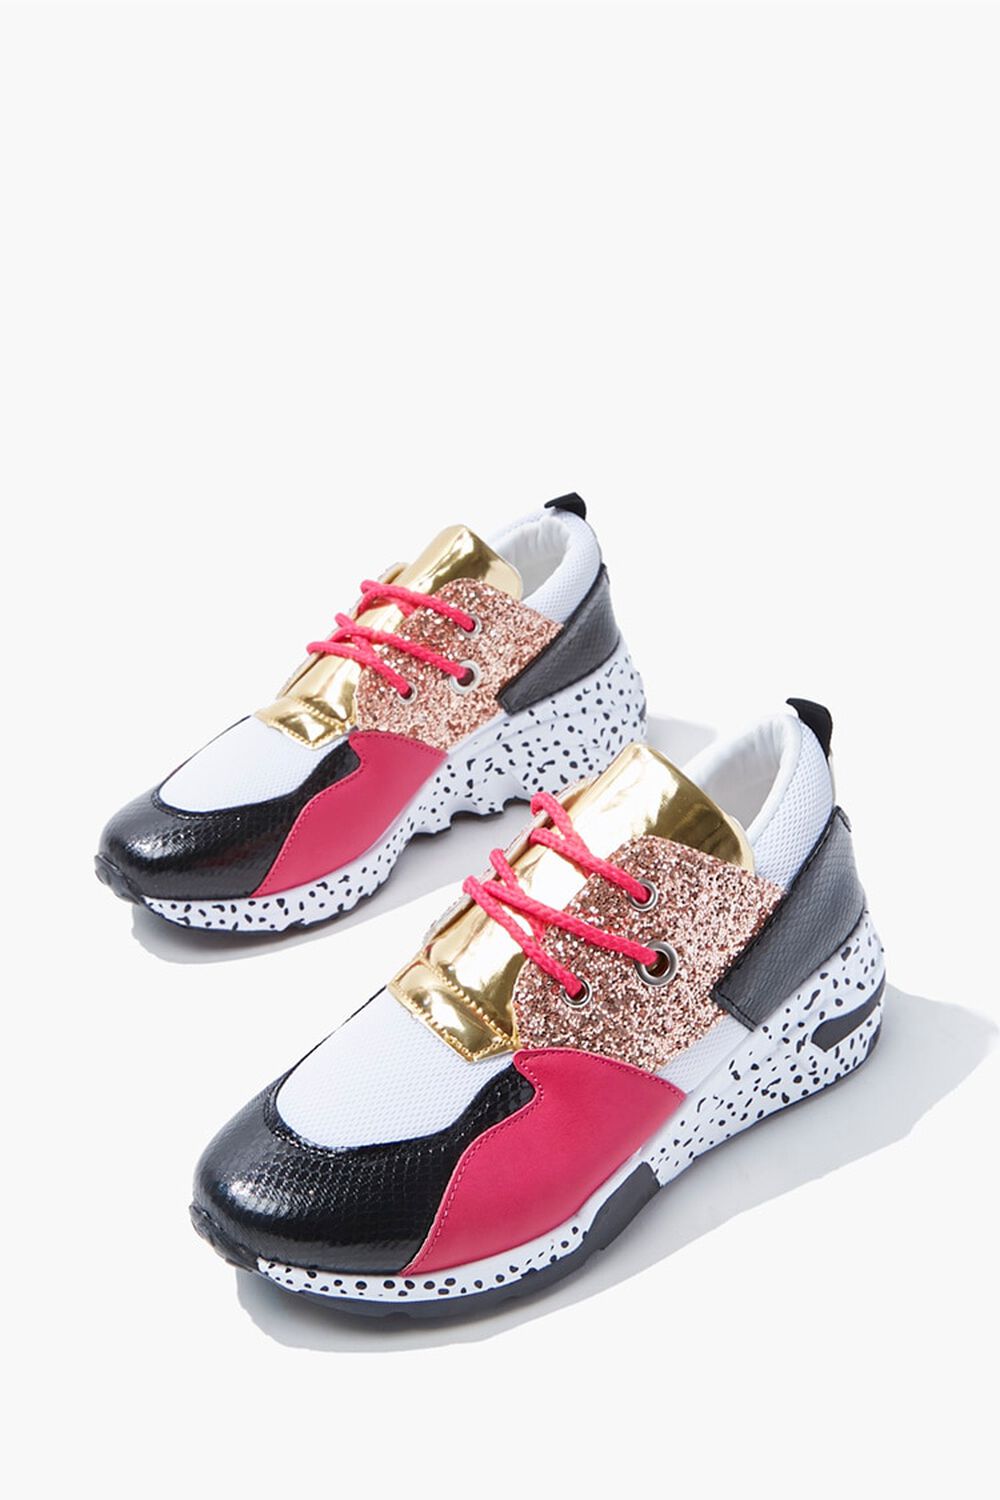 PINK/MULTI Colorblock Speckled Sneakers, image 3